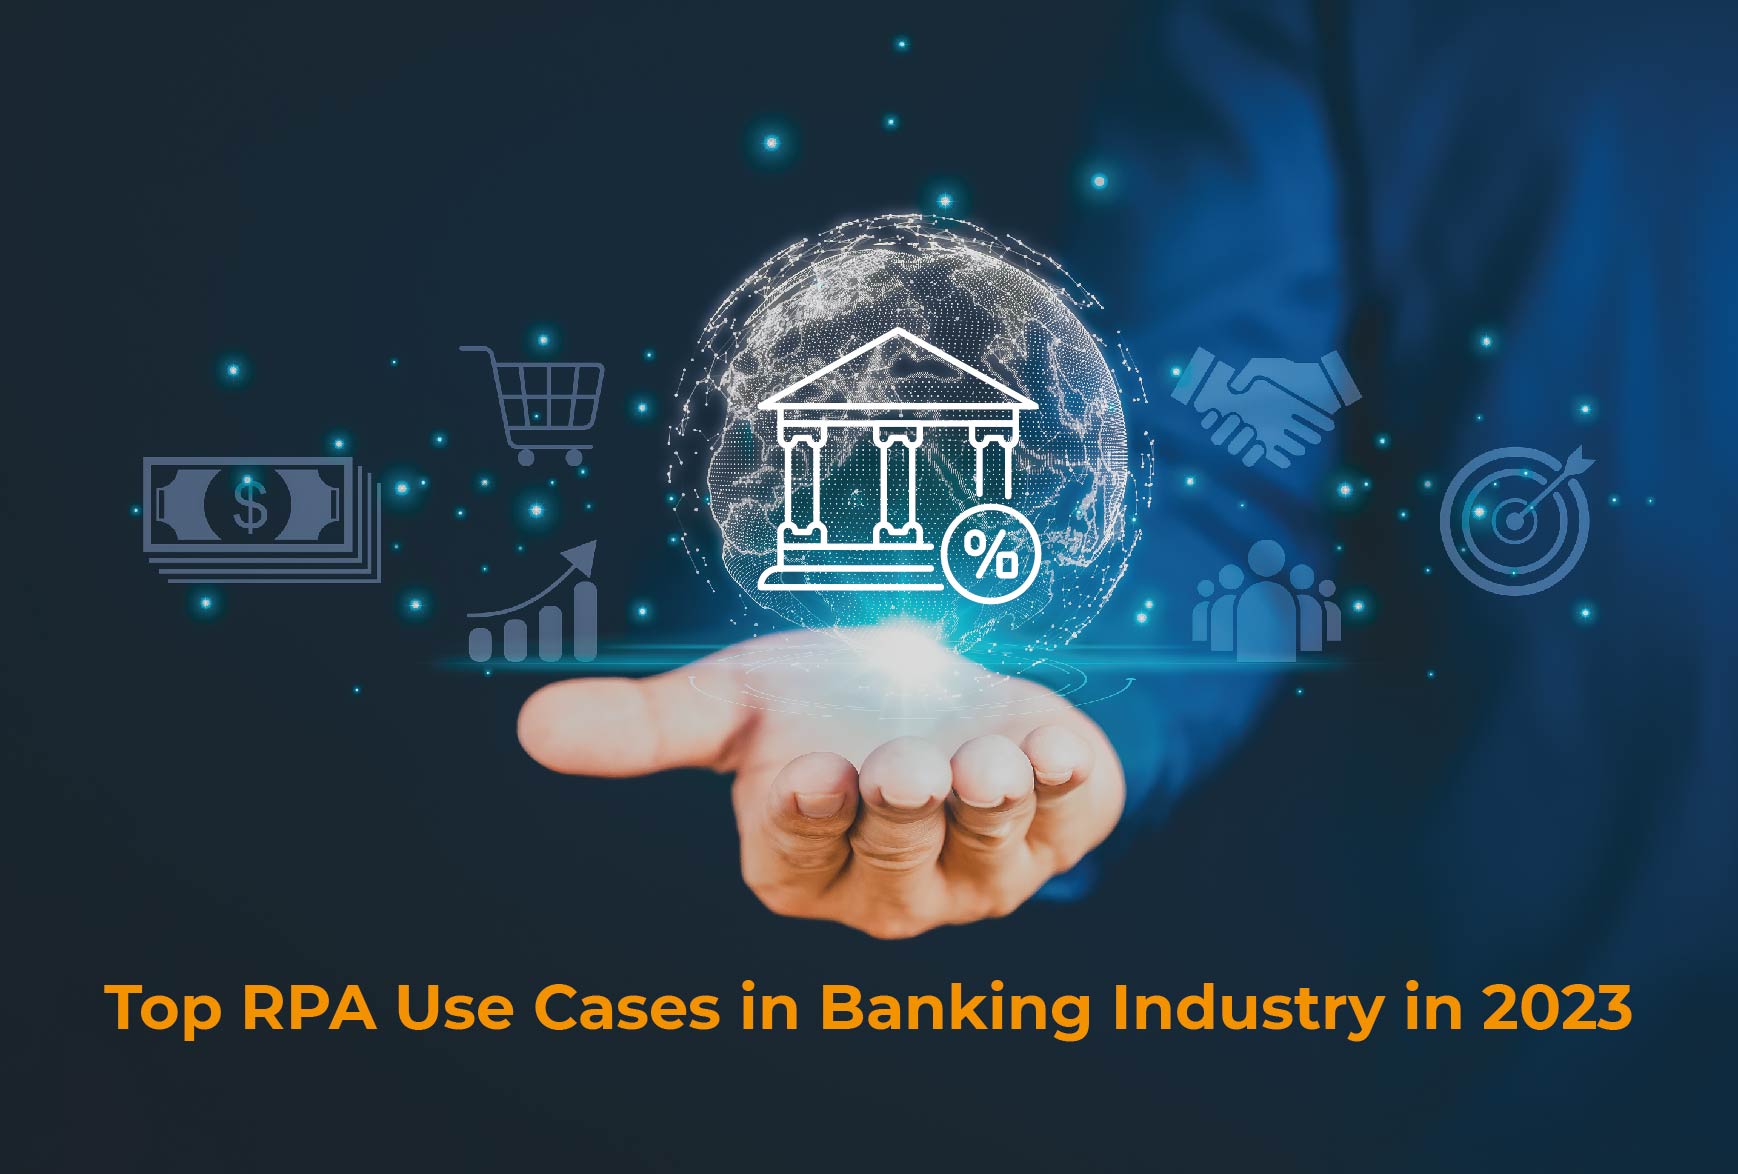 RPA Use Cases in Banking